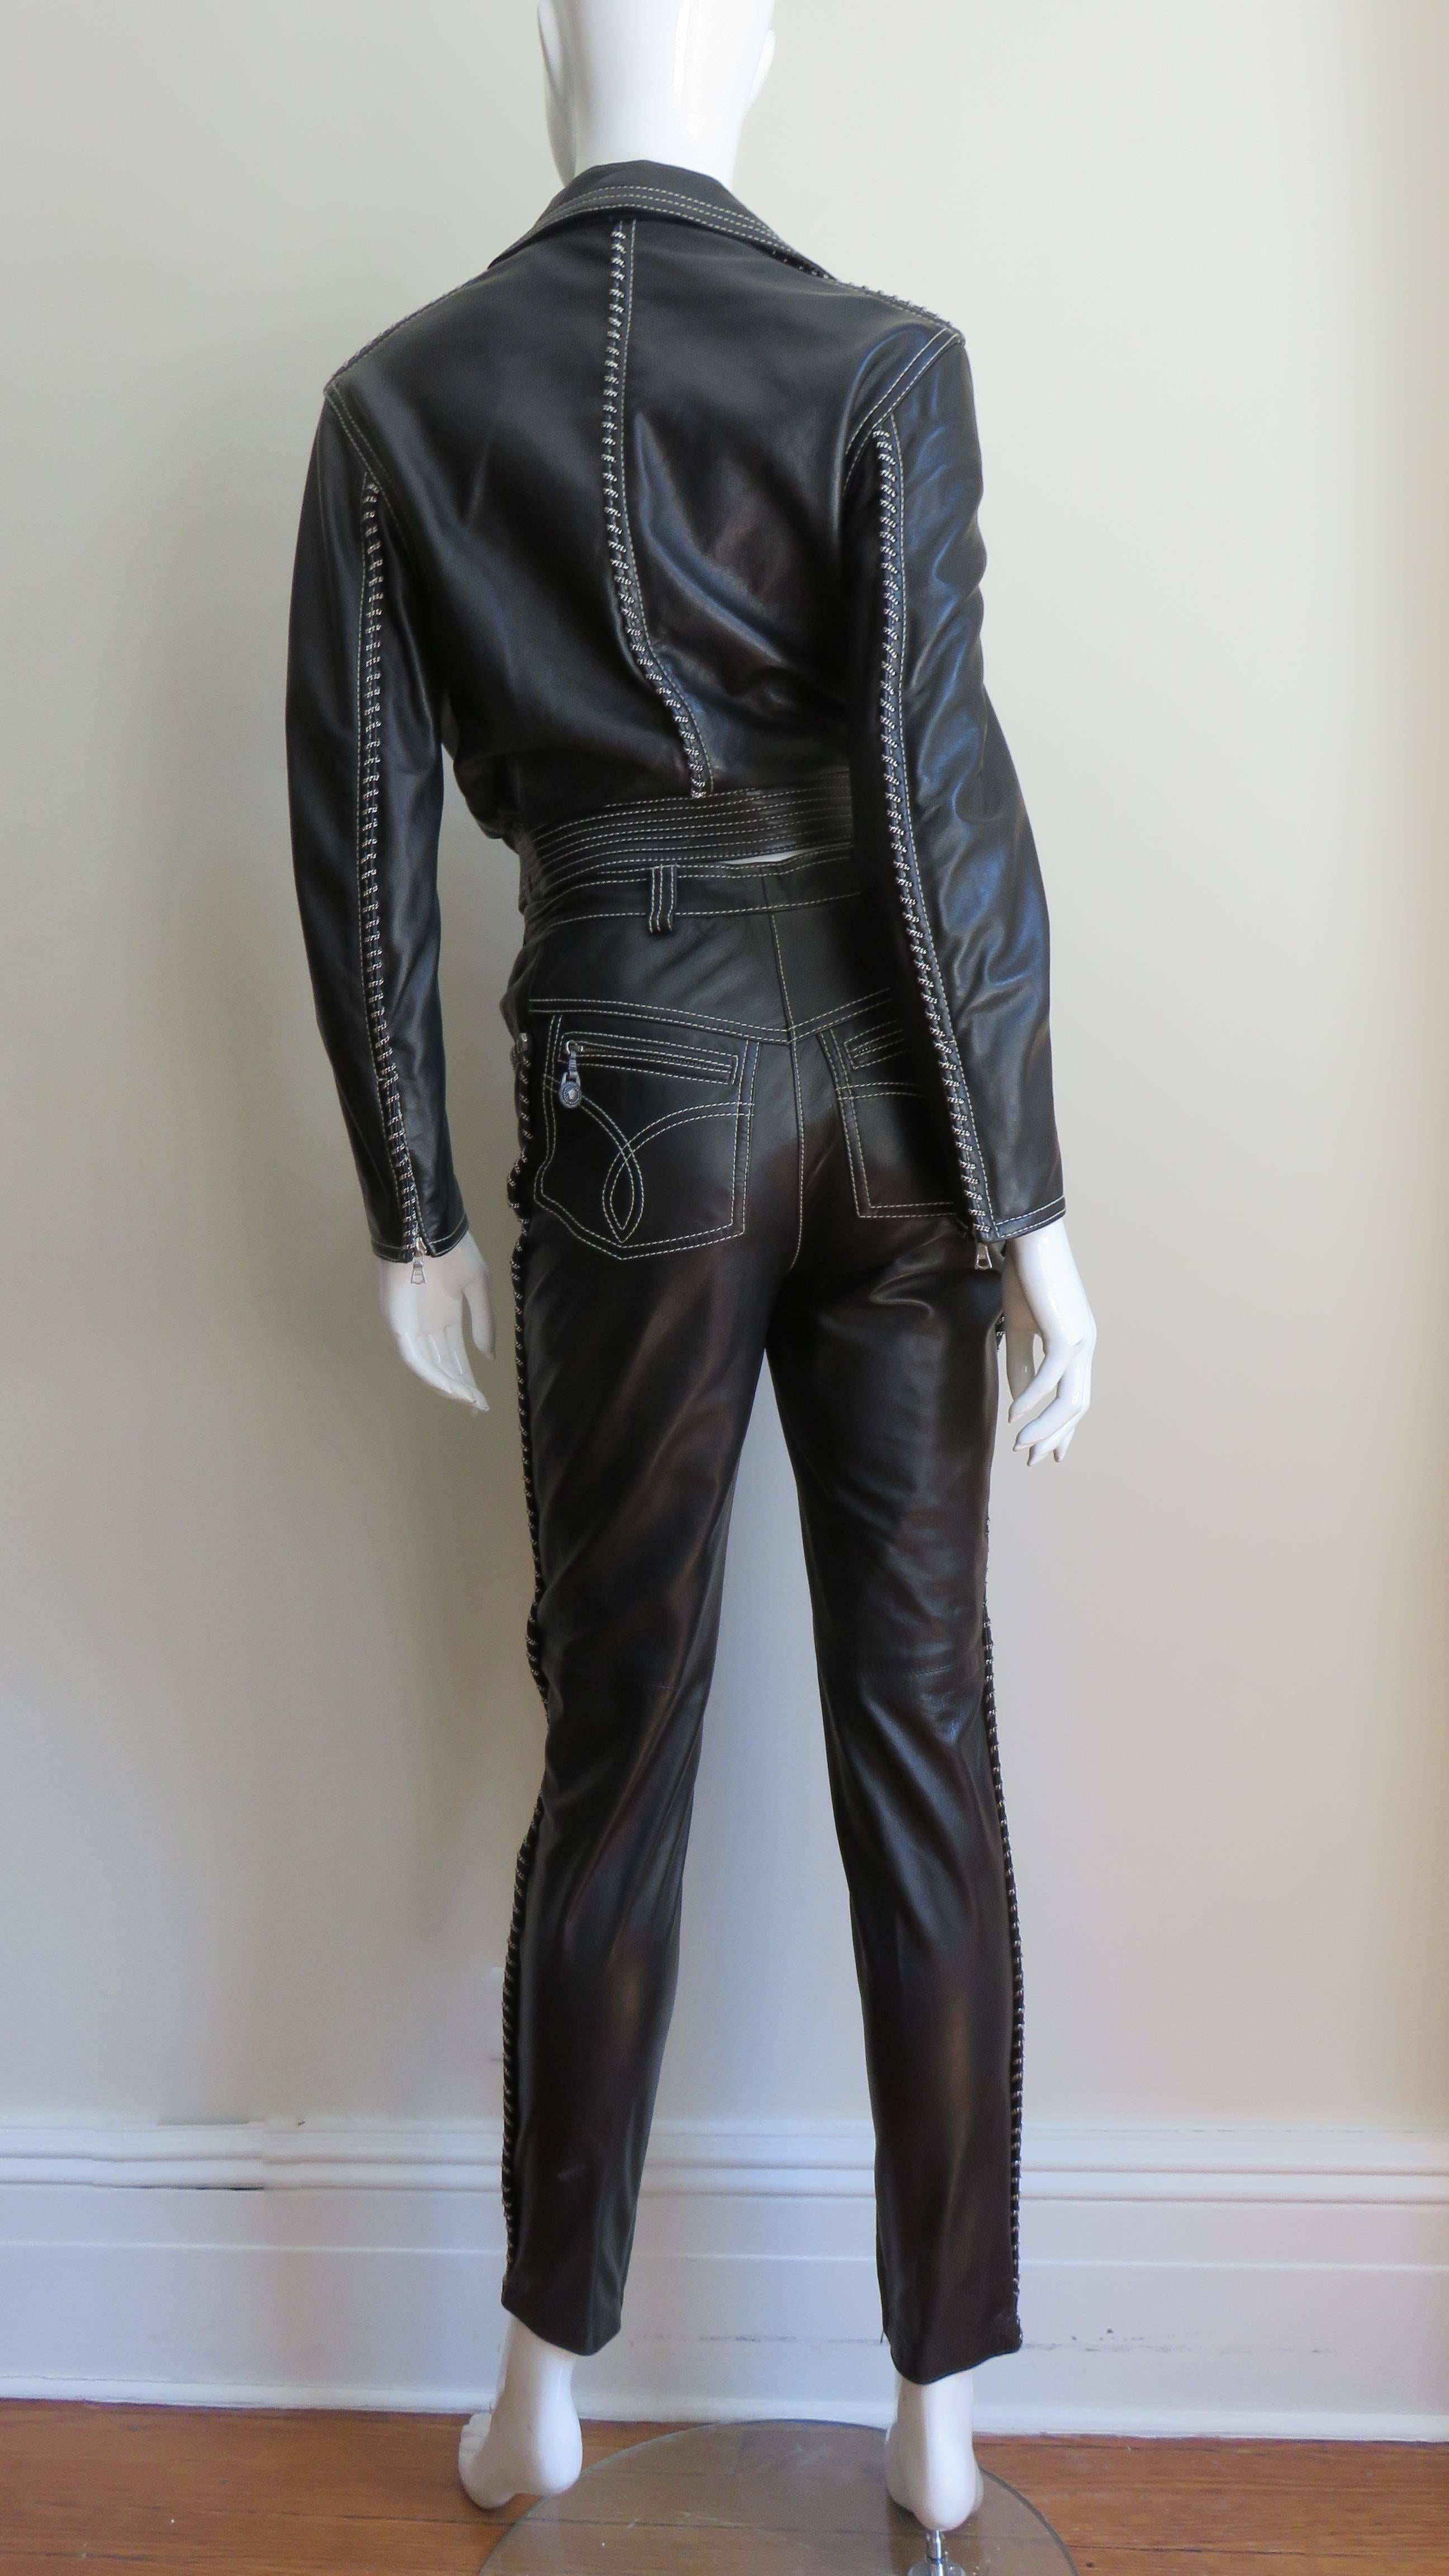  Gianni Versace A/W 1992 Leather Motorcycle Jacket and Pants With Chain Trim  For Sale 12